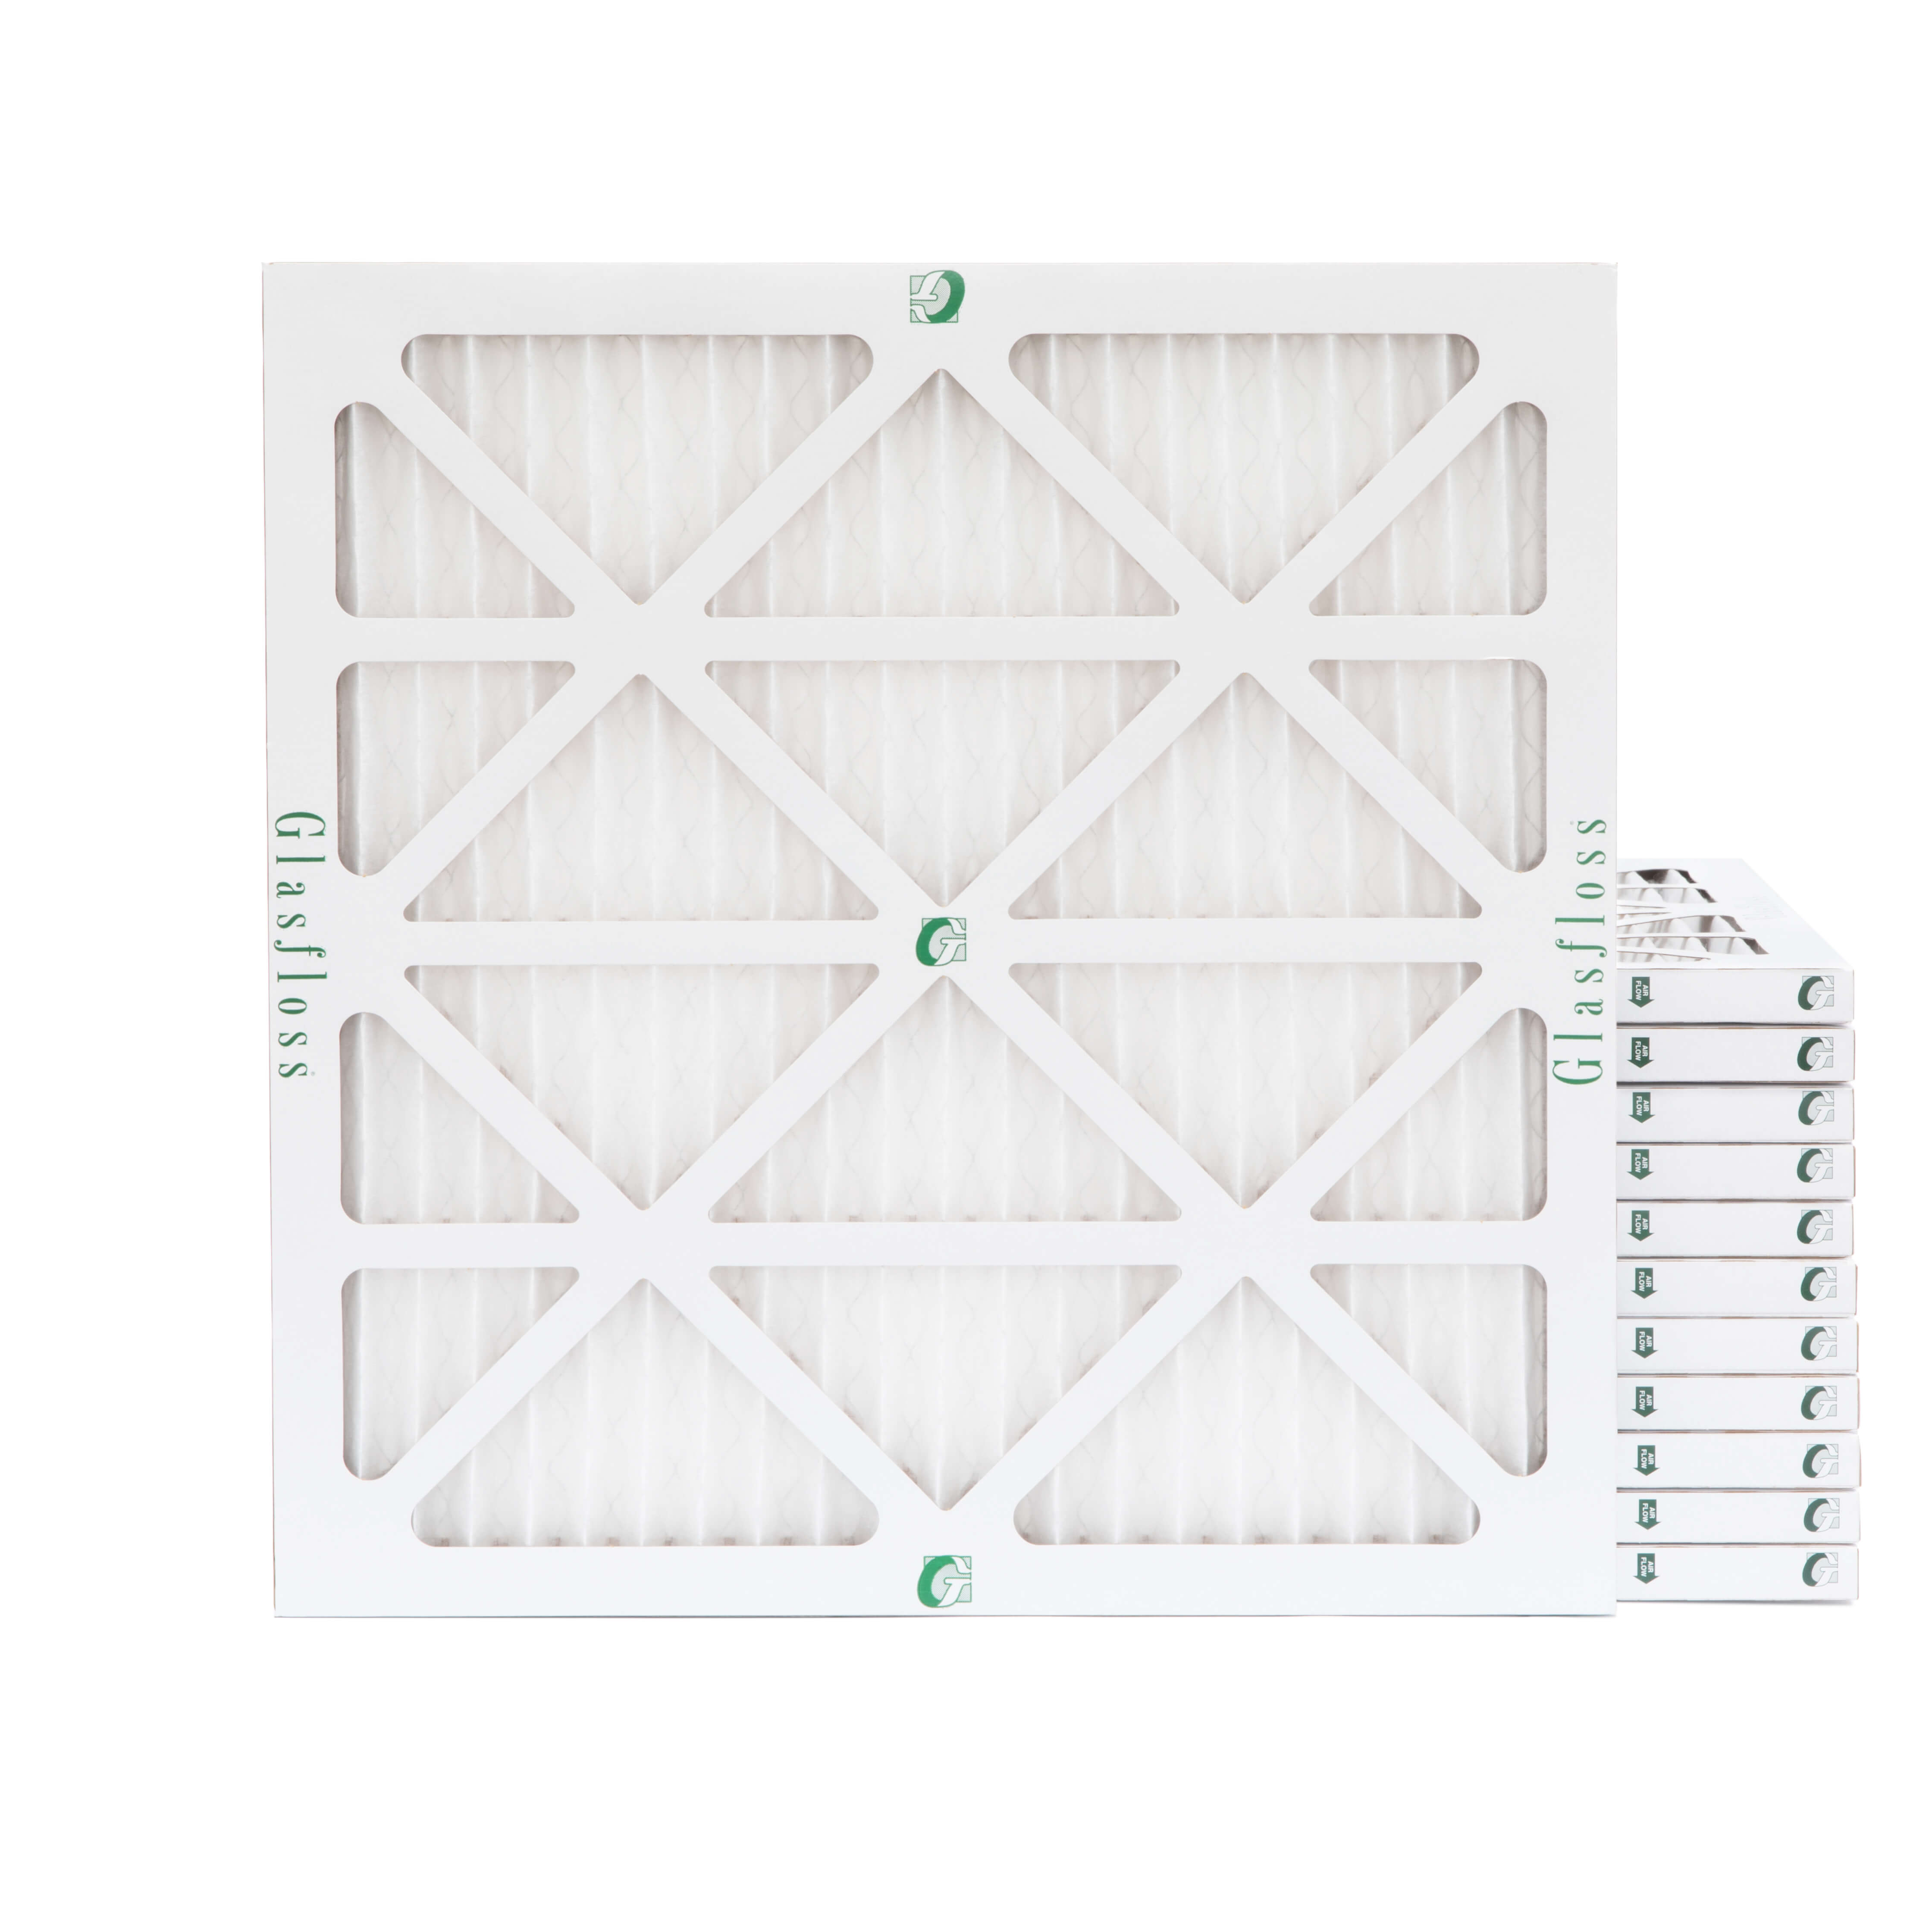 GLASFLOSS 18X20X1 MERV 10 AC & Furnace Air Filters. Case Of 12. Actual Size: 17-1/2 X 19-1/2 X 7/8